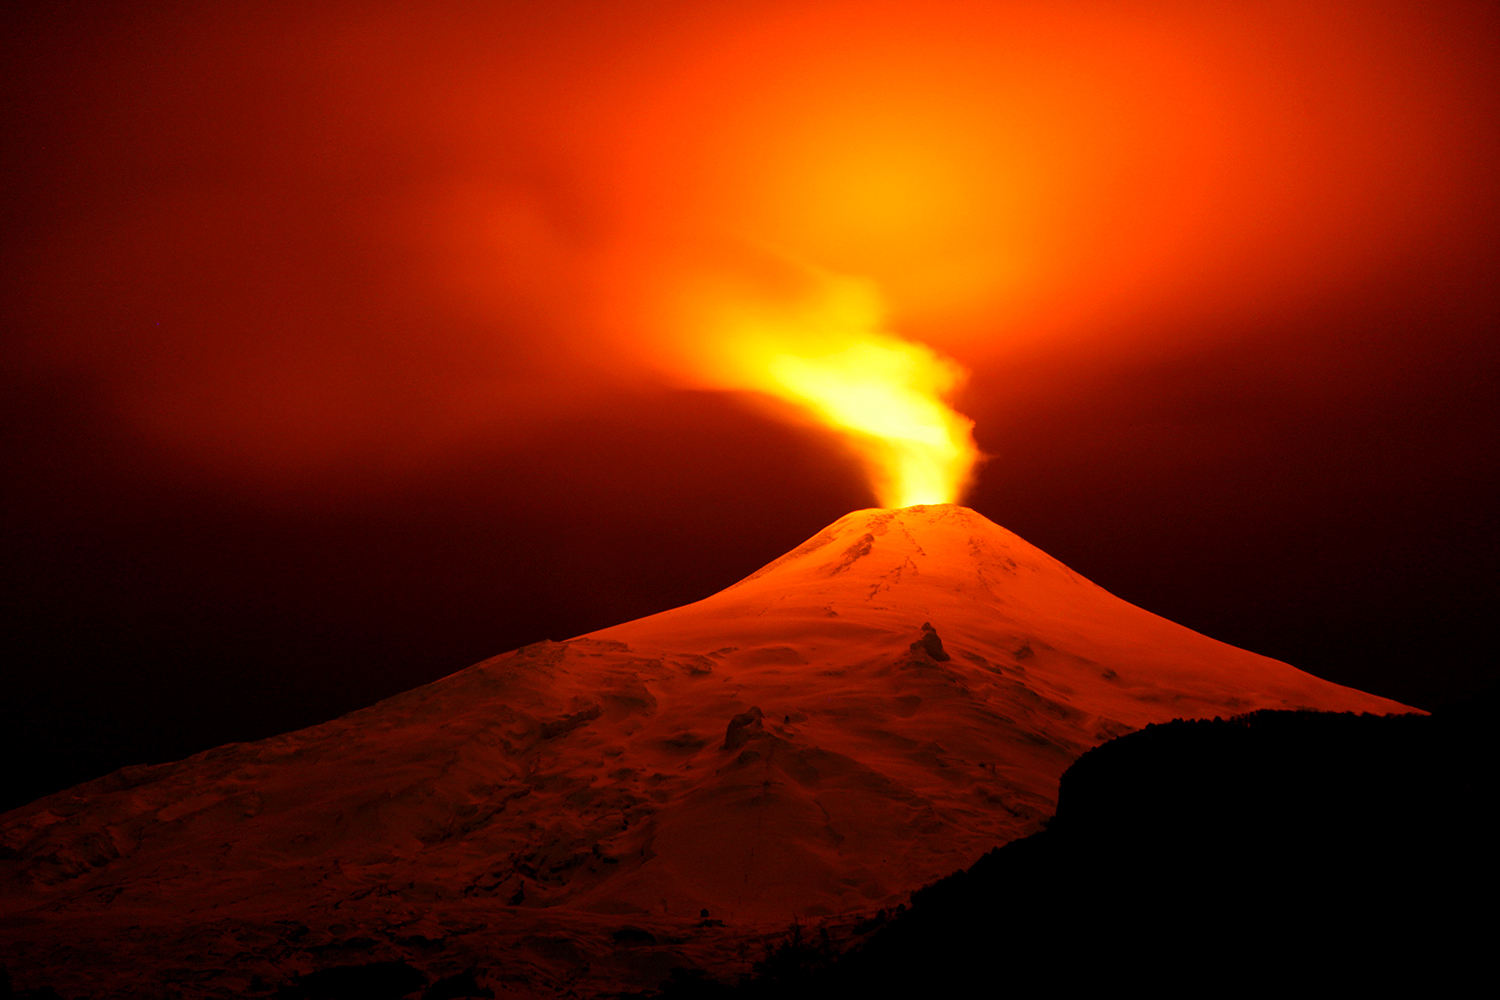 IBM is studying how to predict earthquakes and volcanoes